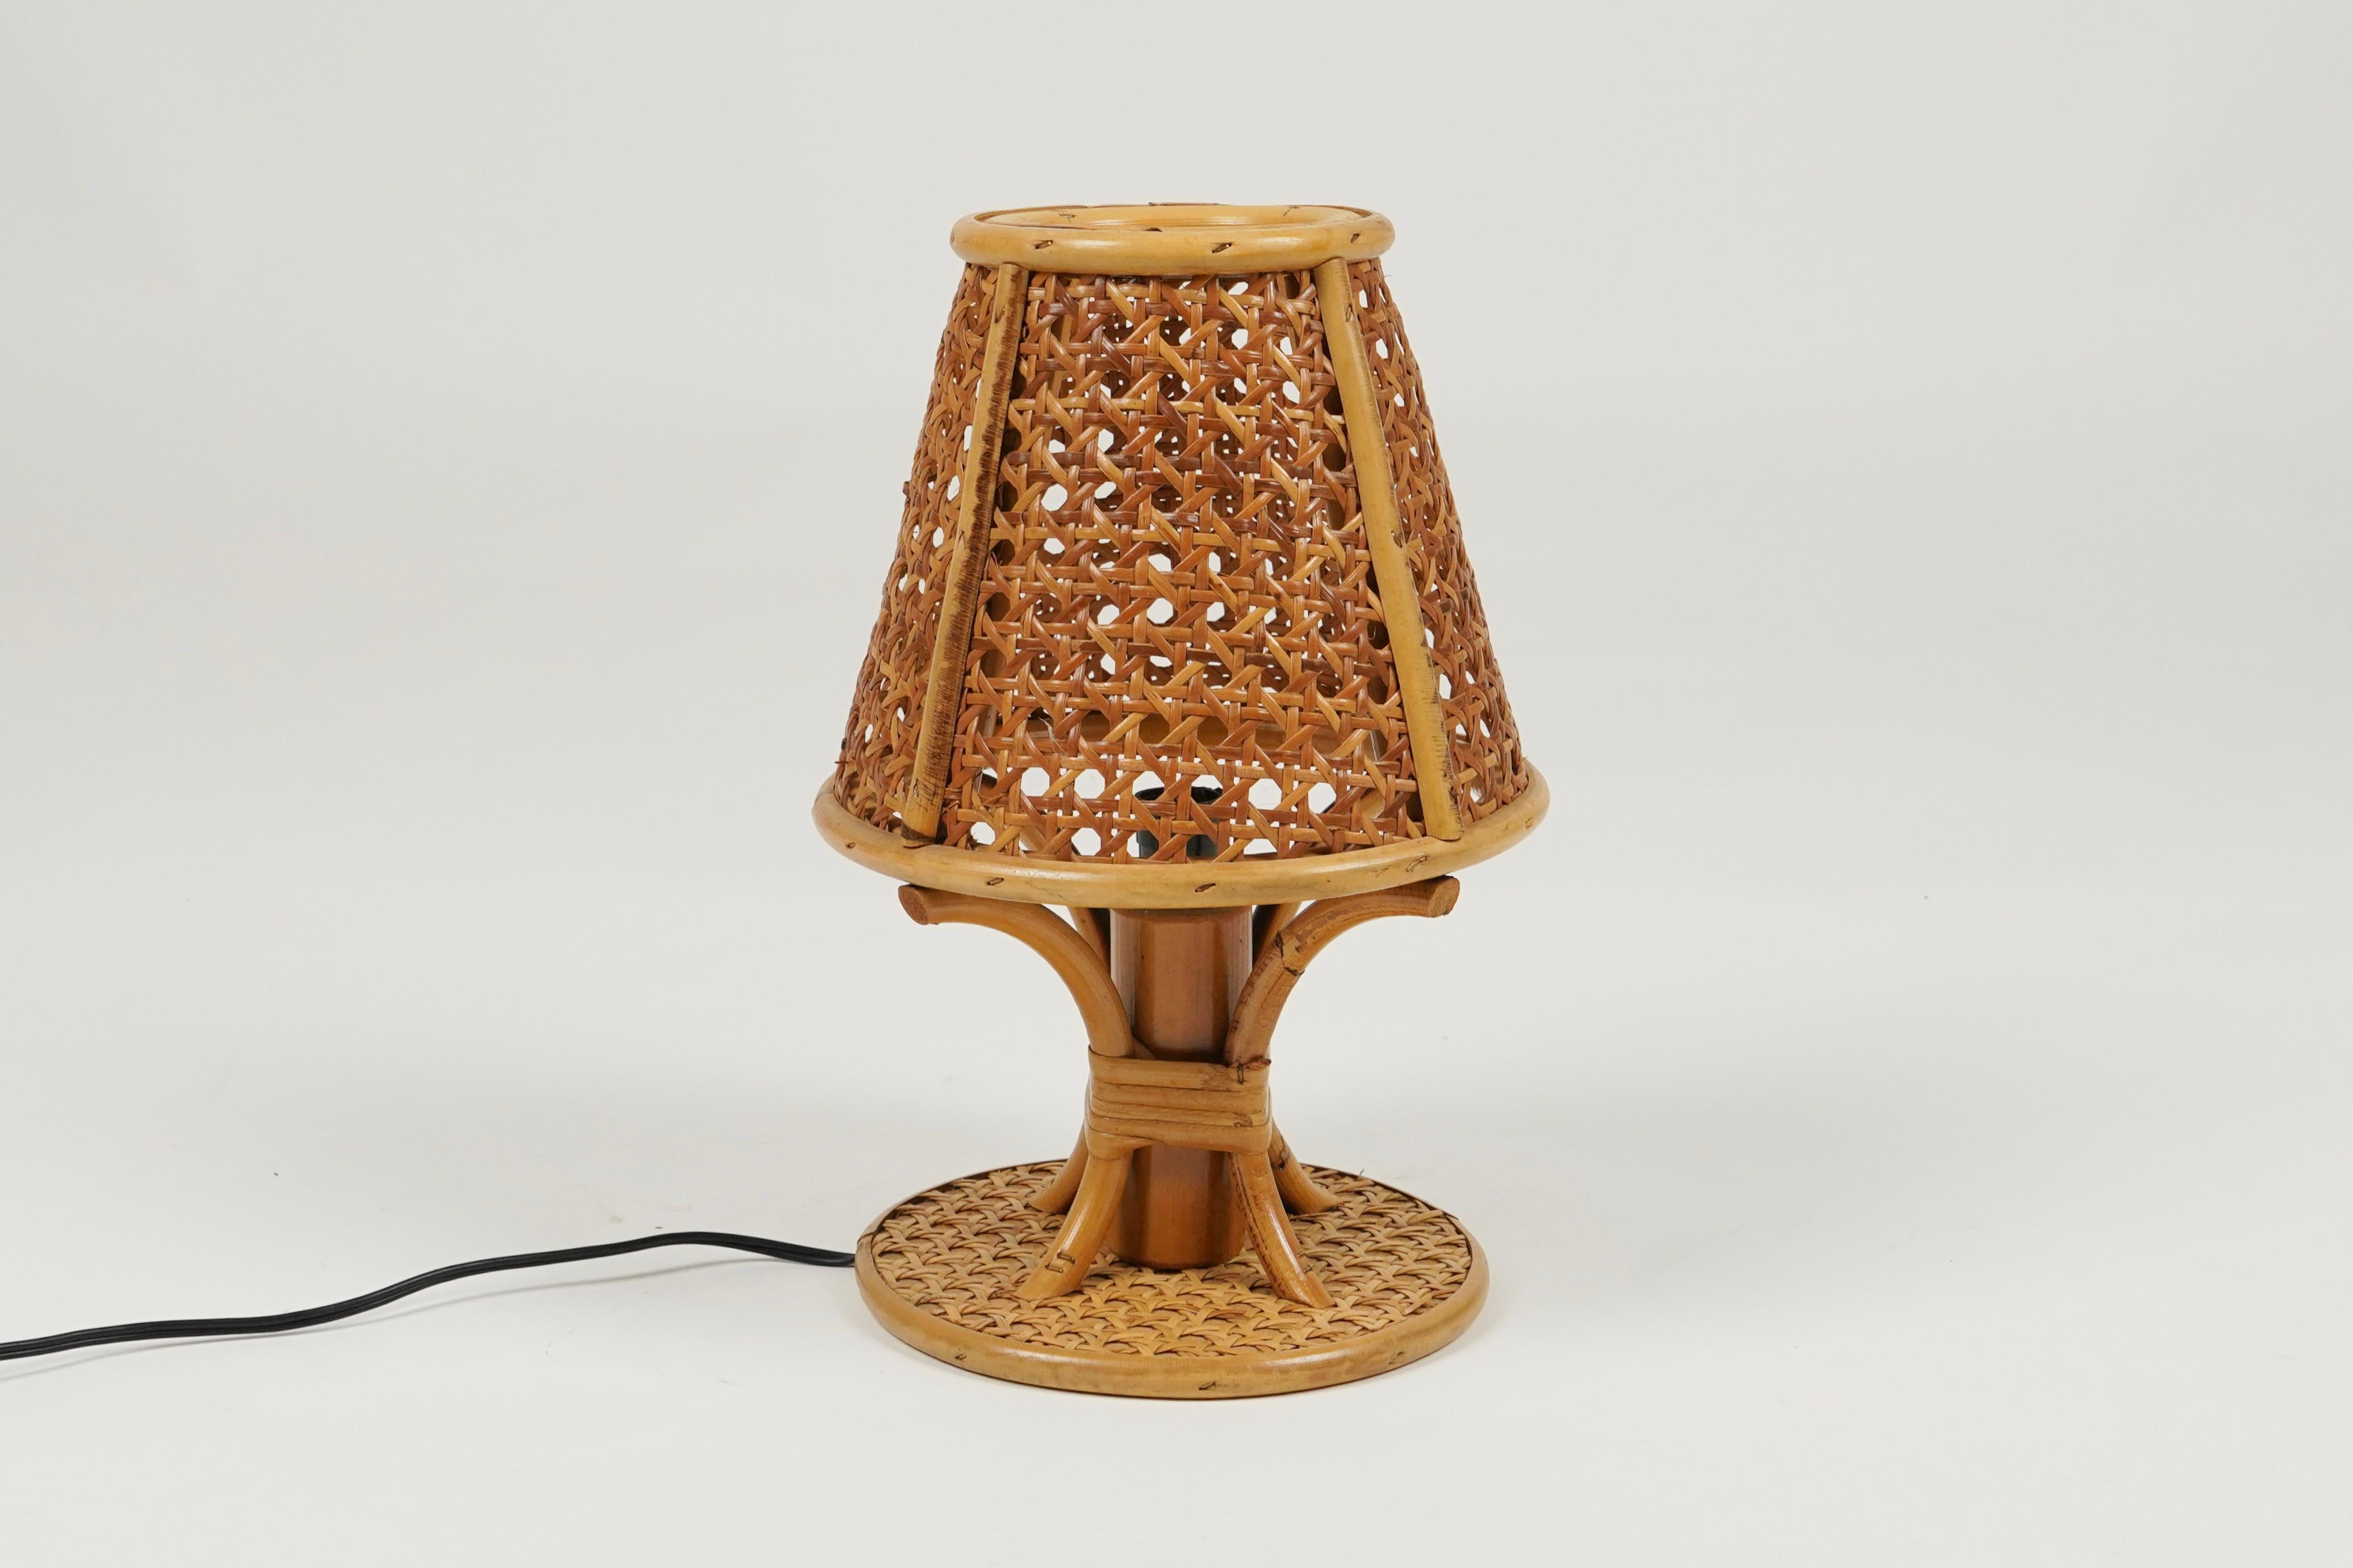 Beautiful table lamp in rattan and wicker in the style of Louis Sognot.   

Made in Italy in the 1970s.   

Louis Sognot was a French designer best known for his elegant furniture made from a combination of rattan and wood. Sognot was influenced by